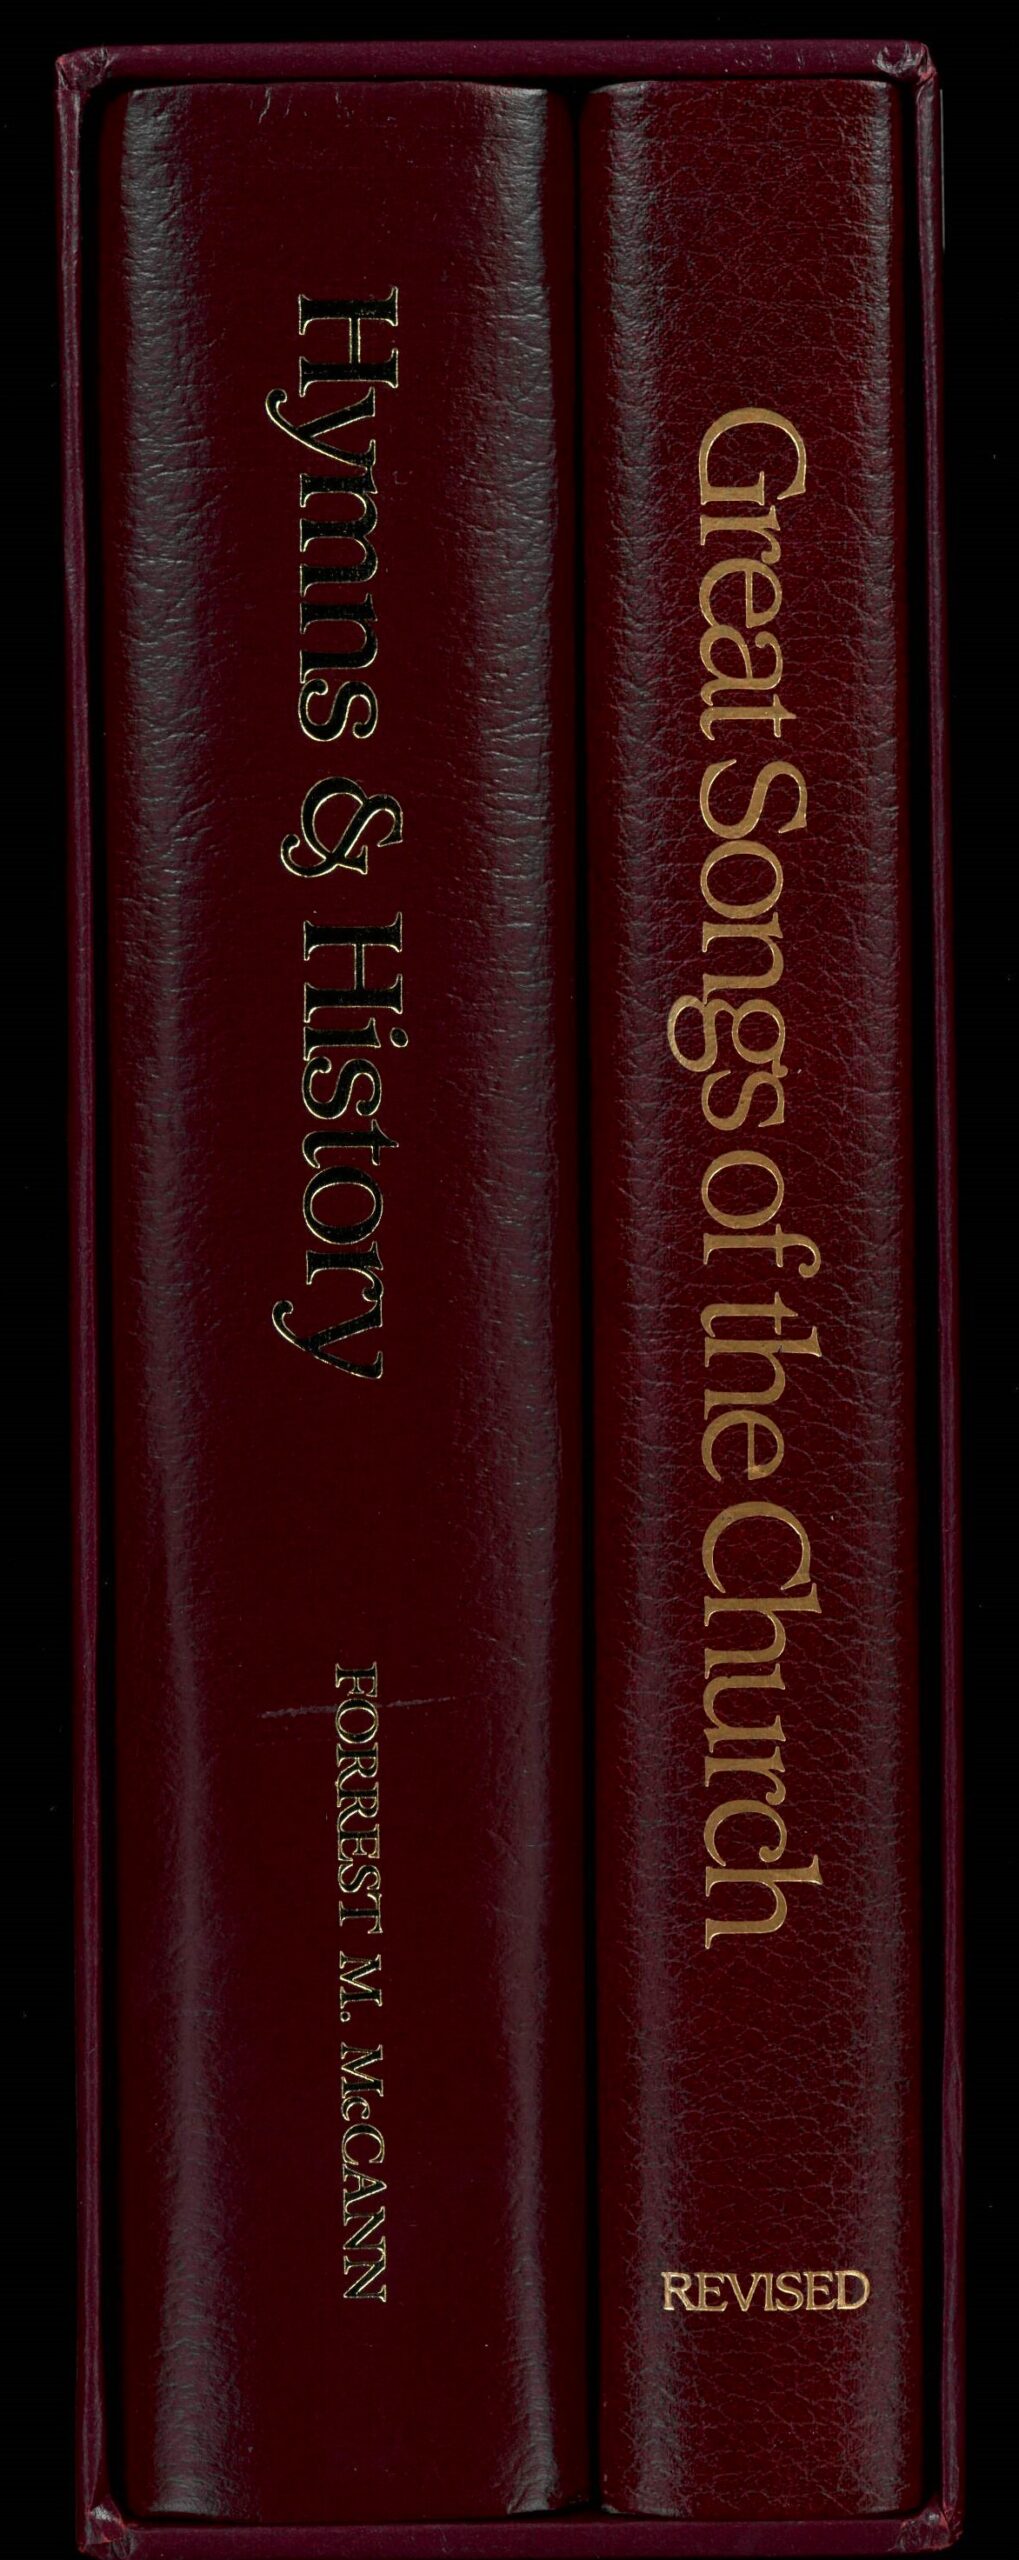 Forrest M. McCann, Hymns and History: An Annotated Survey of Sources. ACU Press: Abilene, 1997. ACU Presidents' Circle Edition with Great Songs of the Church, Revised.